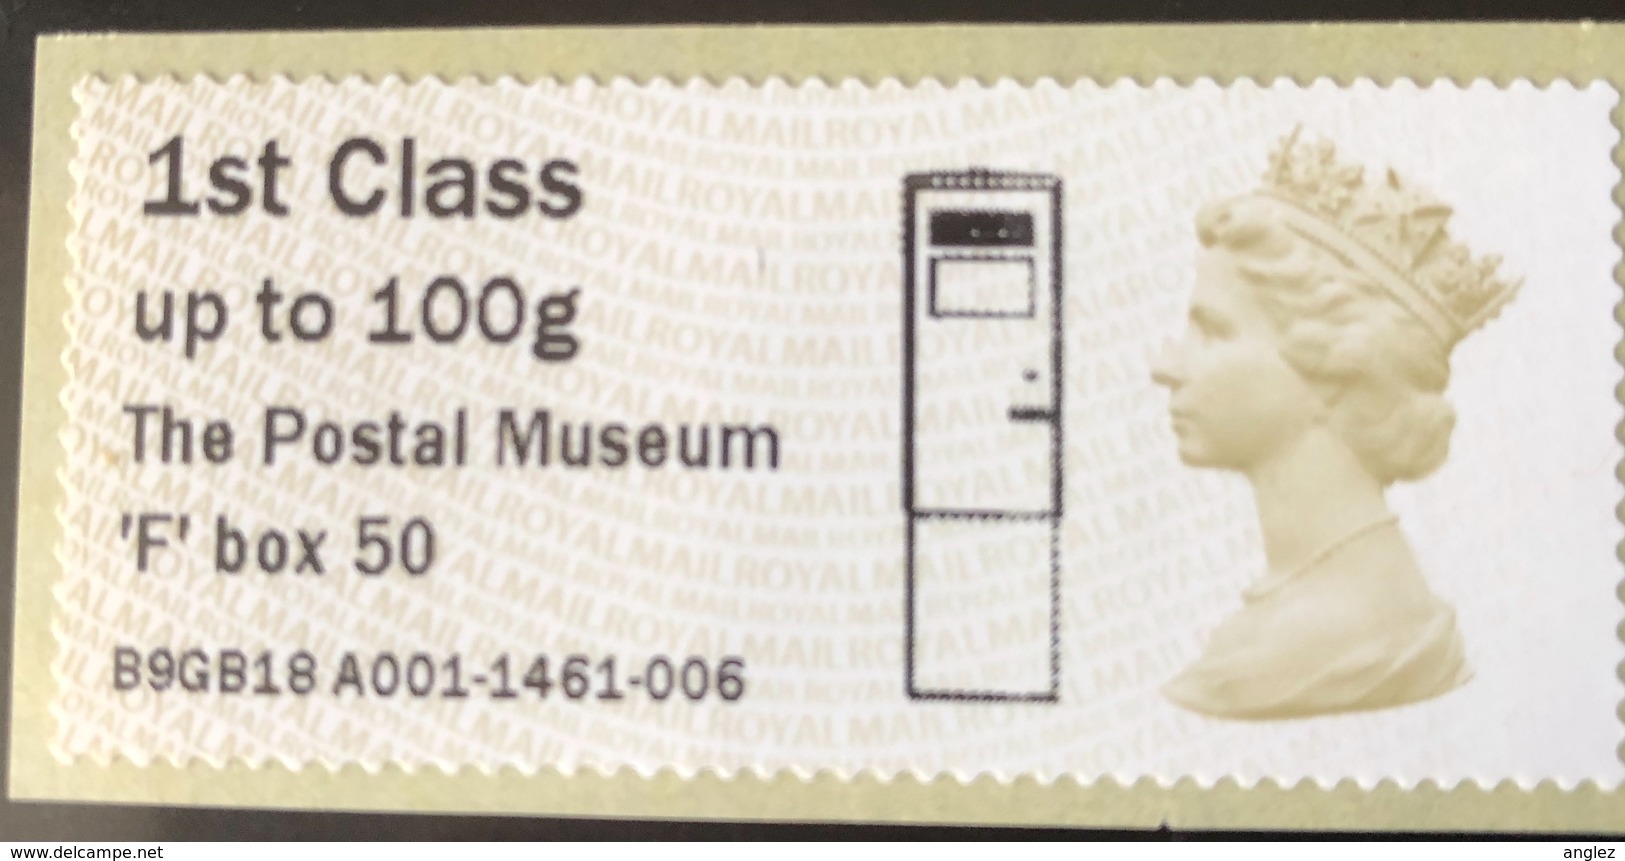 GB Post & Go - The Postal Museum F Type Postbox Overprint - 1st Class / 100g - MA14 Date Code MNH - Post & Go Stamps